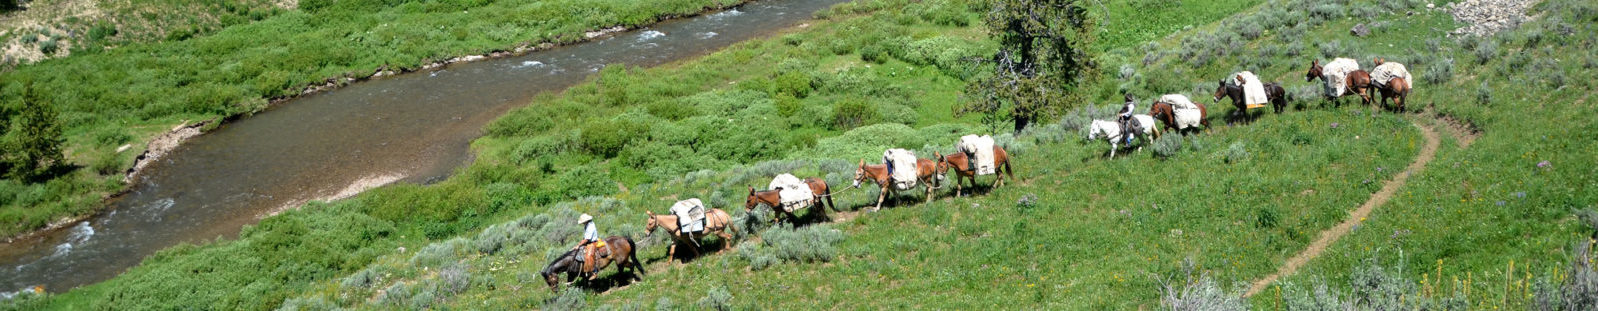 Line of Horses - Horse pack trips in Yellowstone